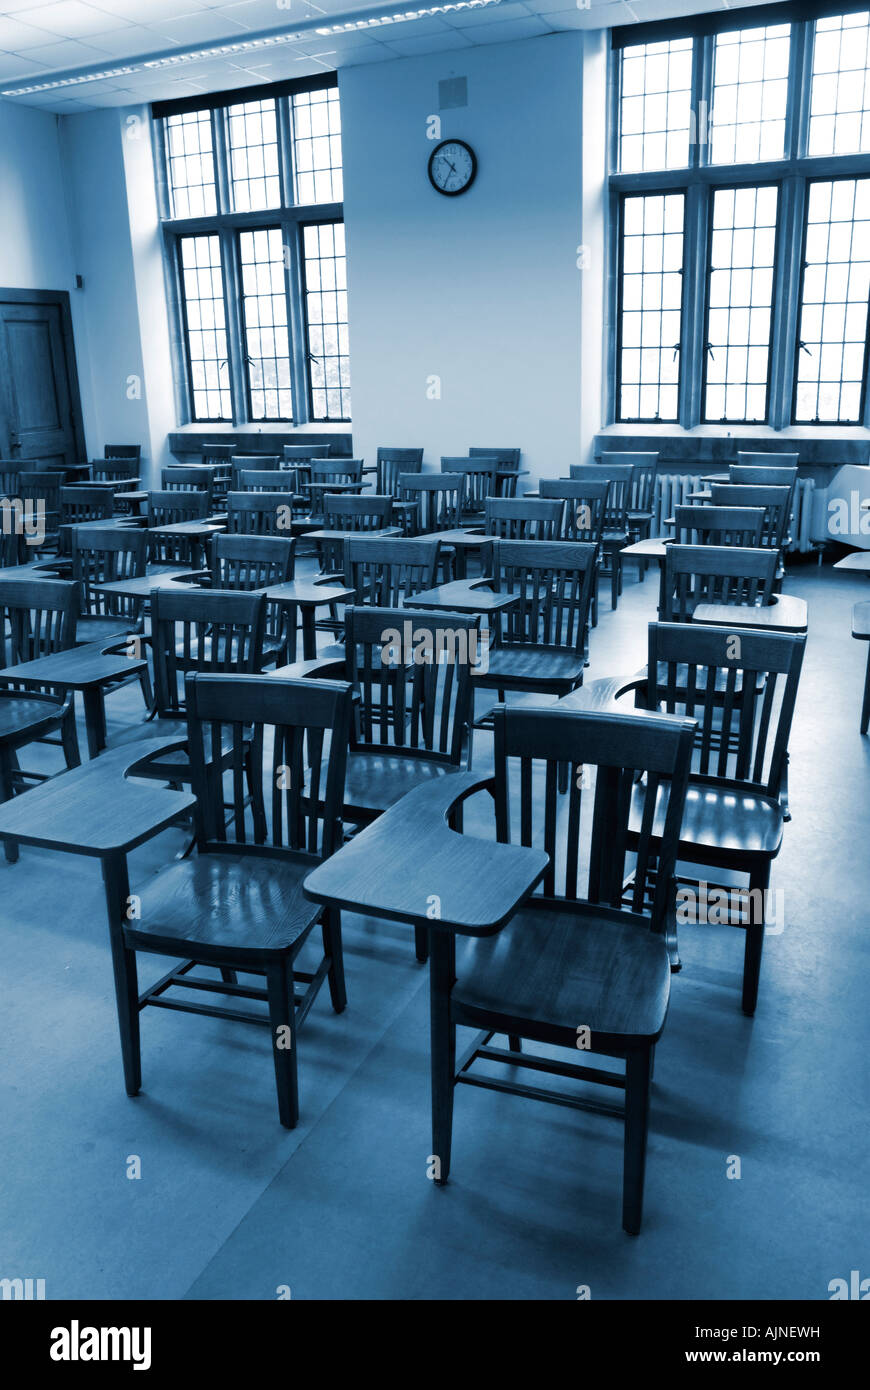 College Classroom With Old Fashioned Antique Wooden Desk Chairs